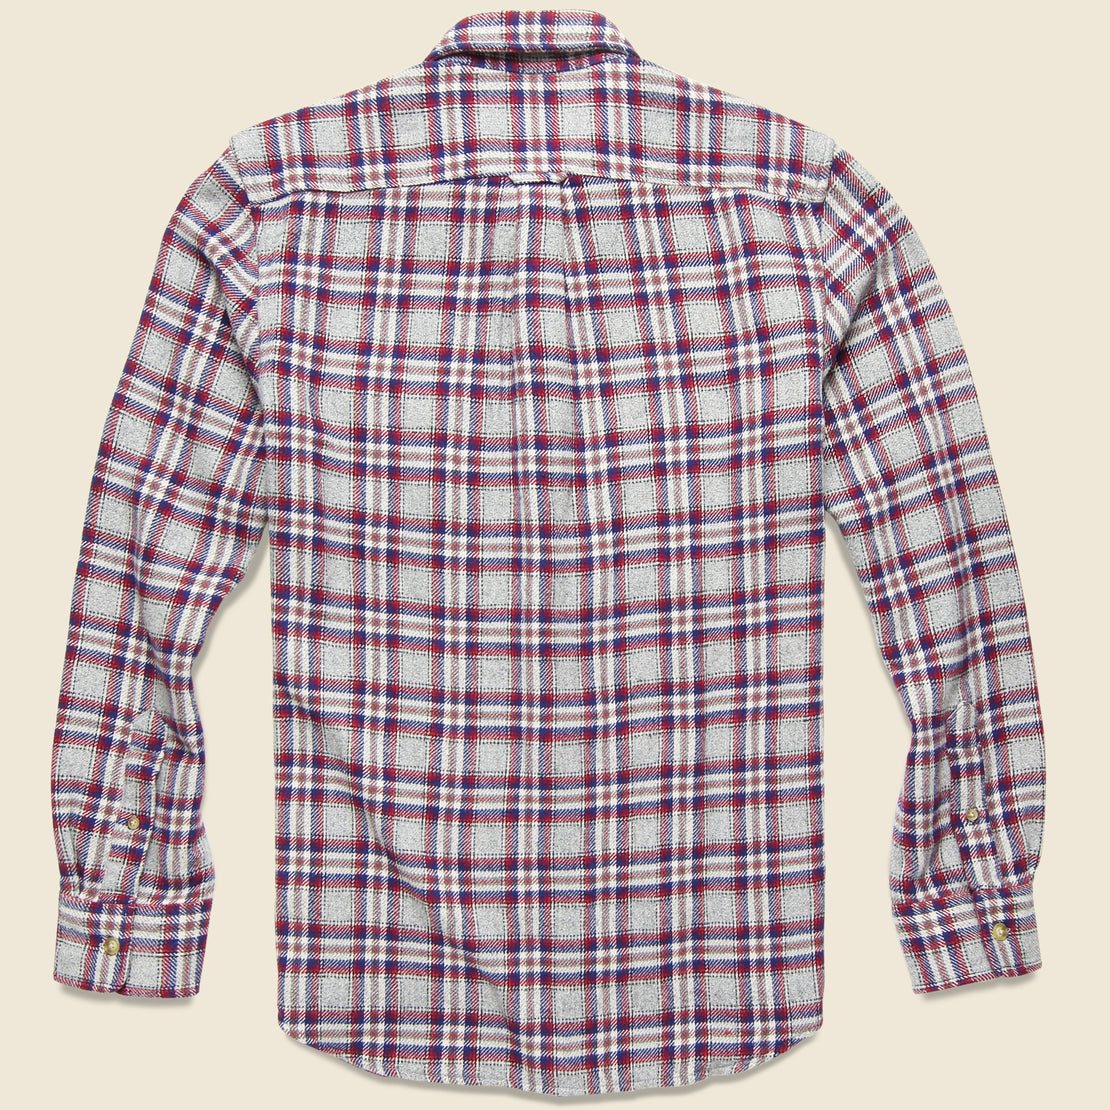 Milbank Heritage Flannel Shirt - Gray/Red - Grayers - STAG Provisions - Tops - L/S Woven - Plaid